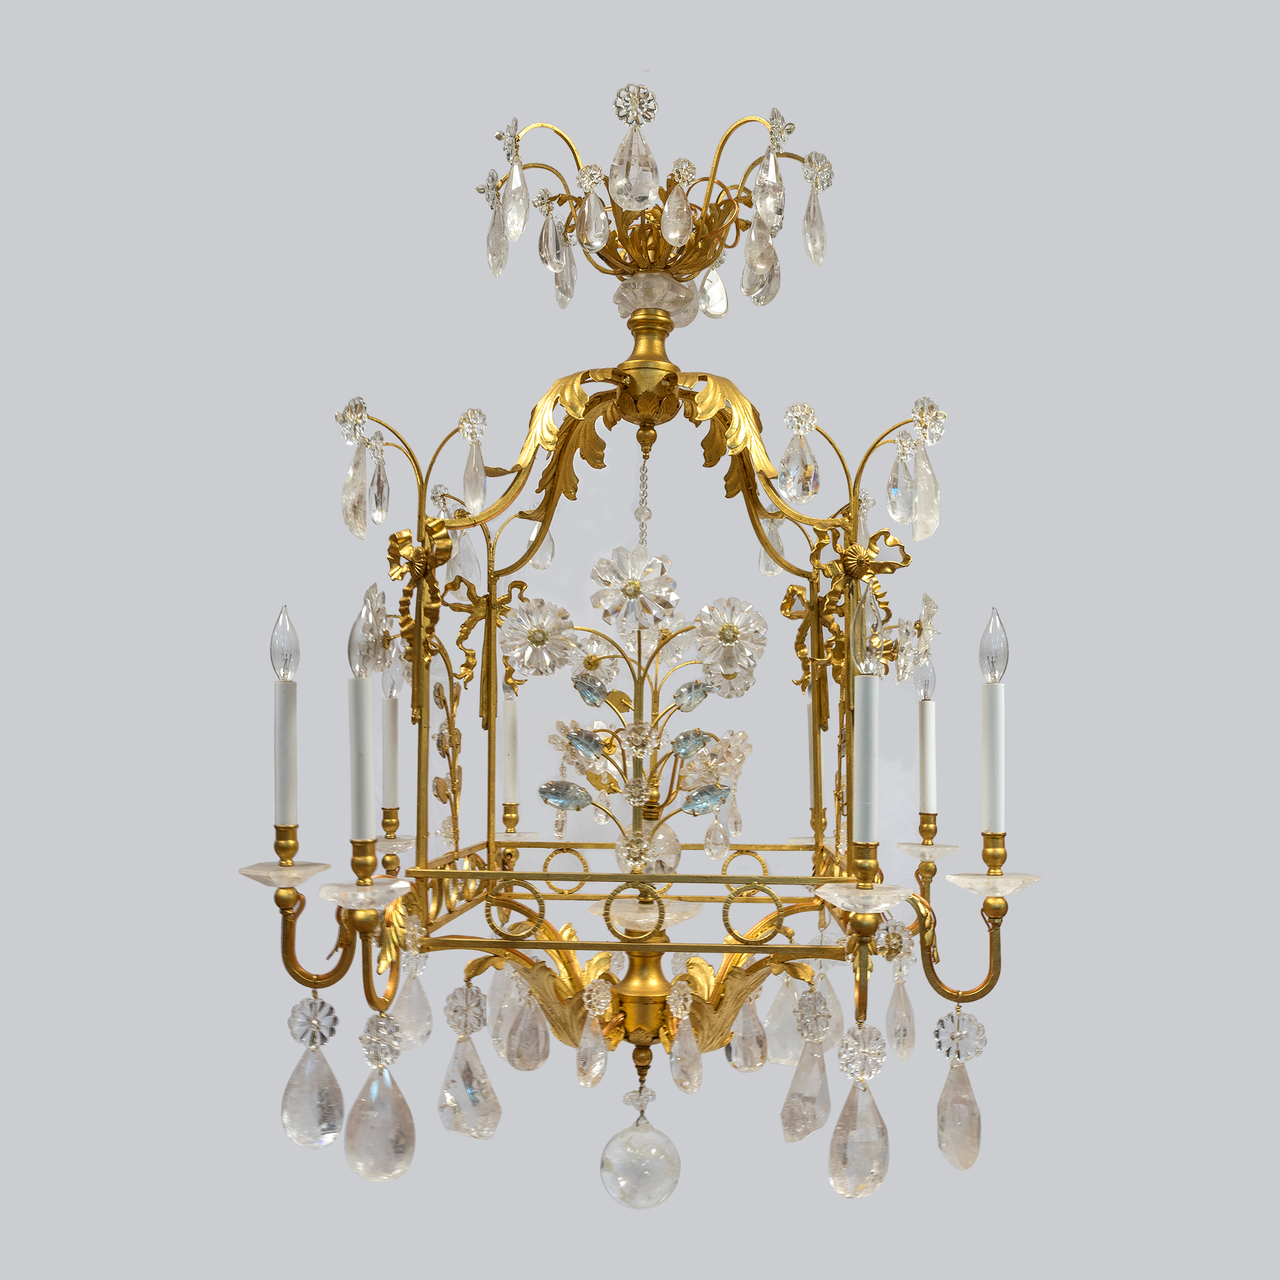 A Charming Gilt-Metal and Rock Crystal Cage-Formed Eight-Light Chandelier